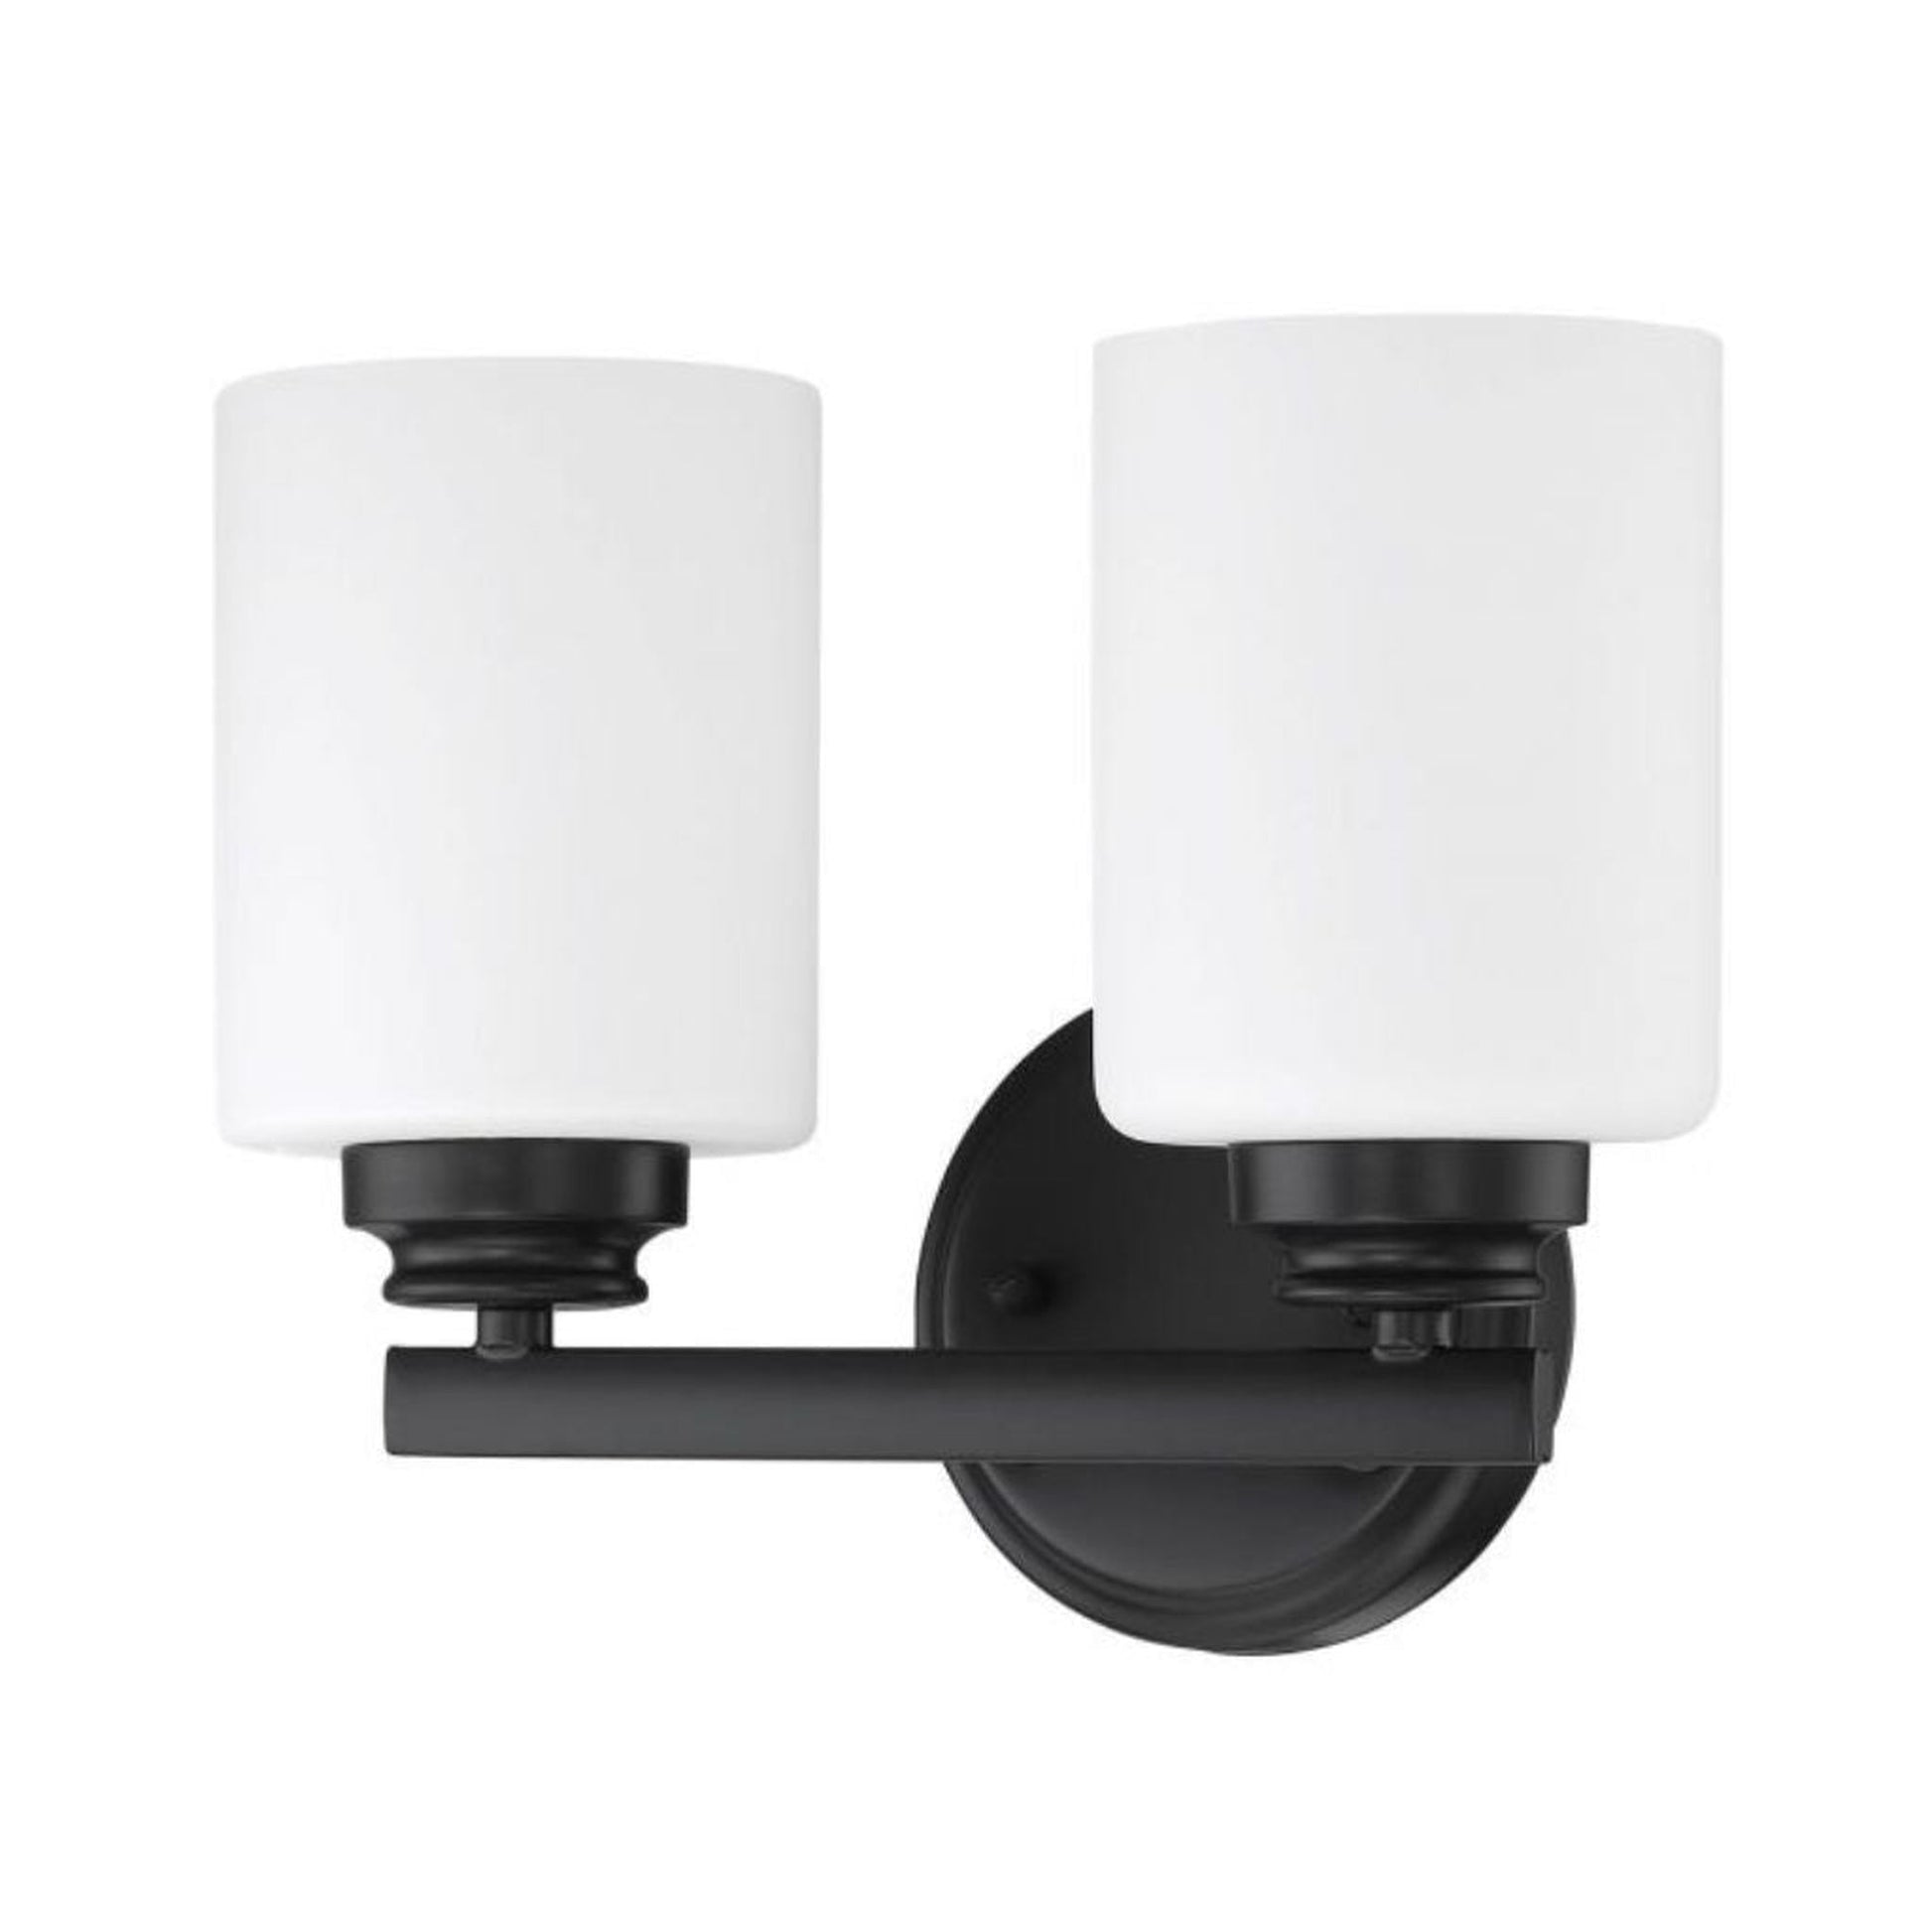 Craftmade Bolden 11" 2-Light Flat Black Vanity Light With White Frosted Glass Shades